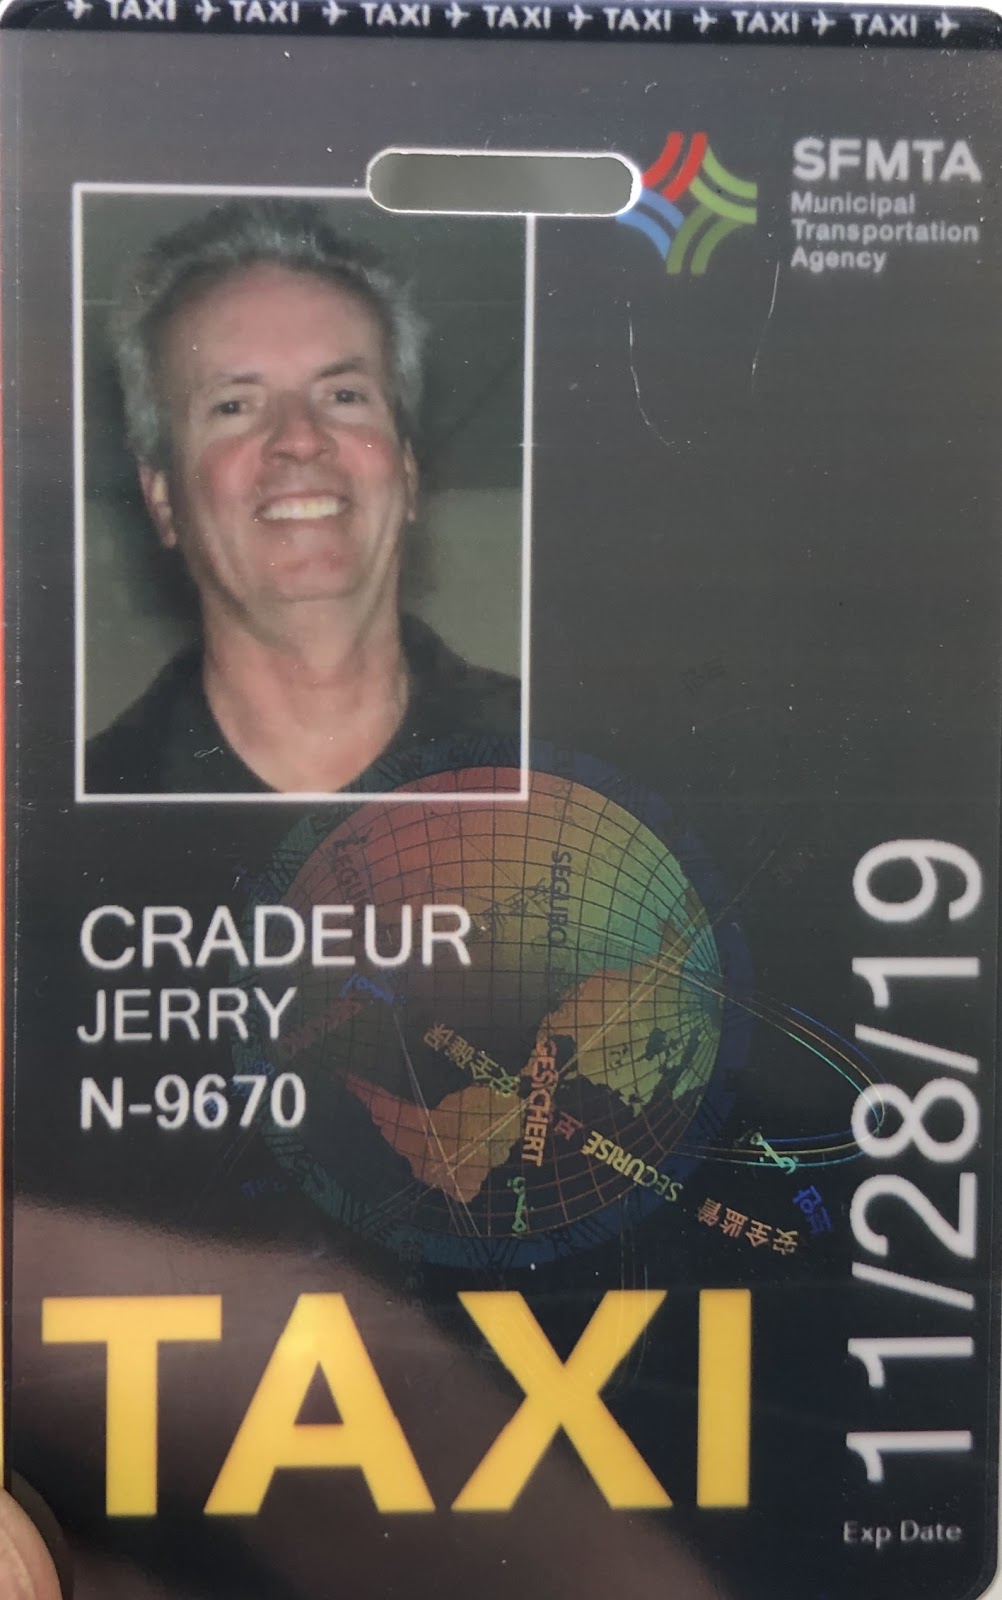 image of The Official San Francisco Taxi Driver “A” Card.